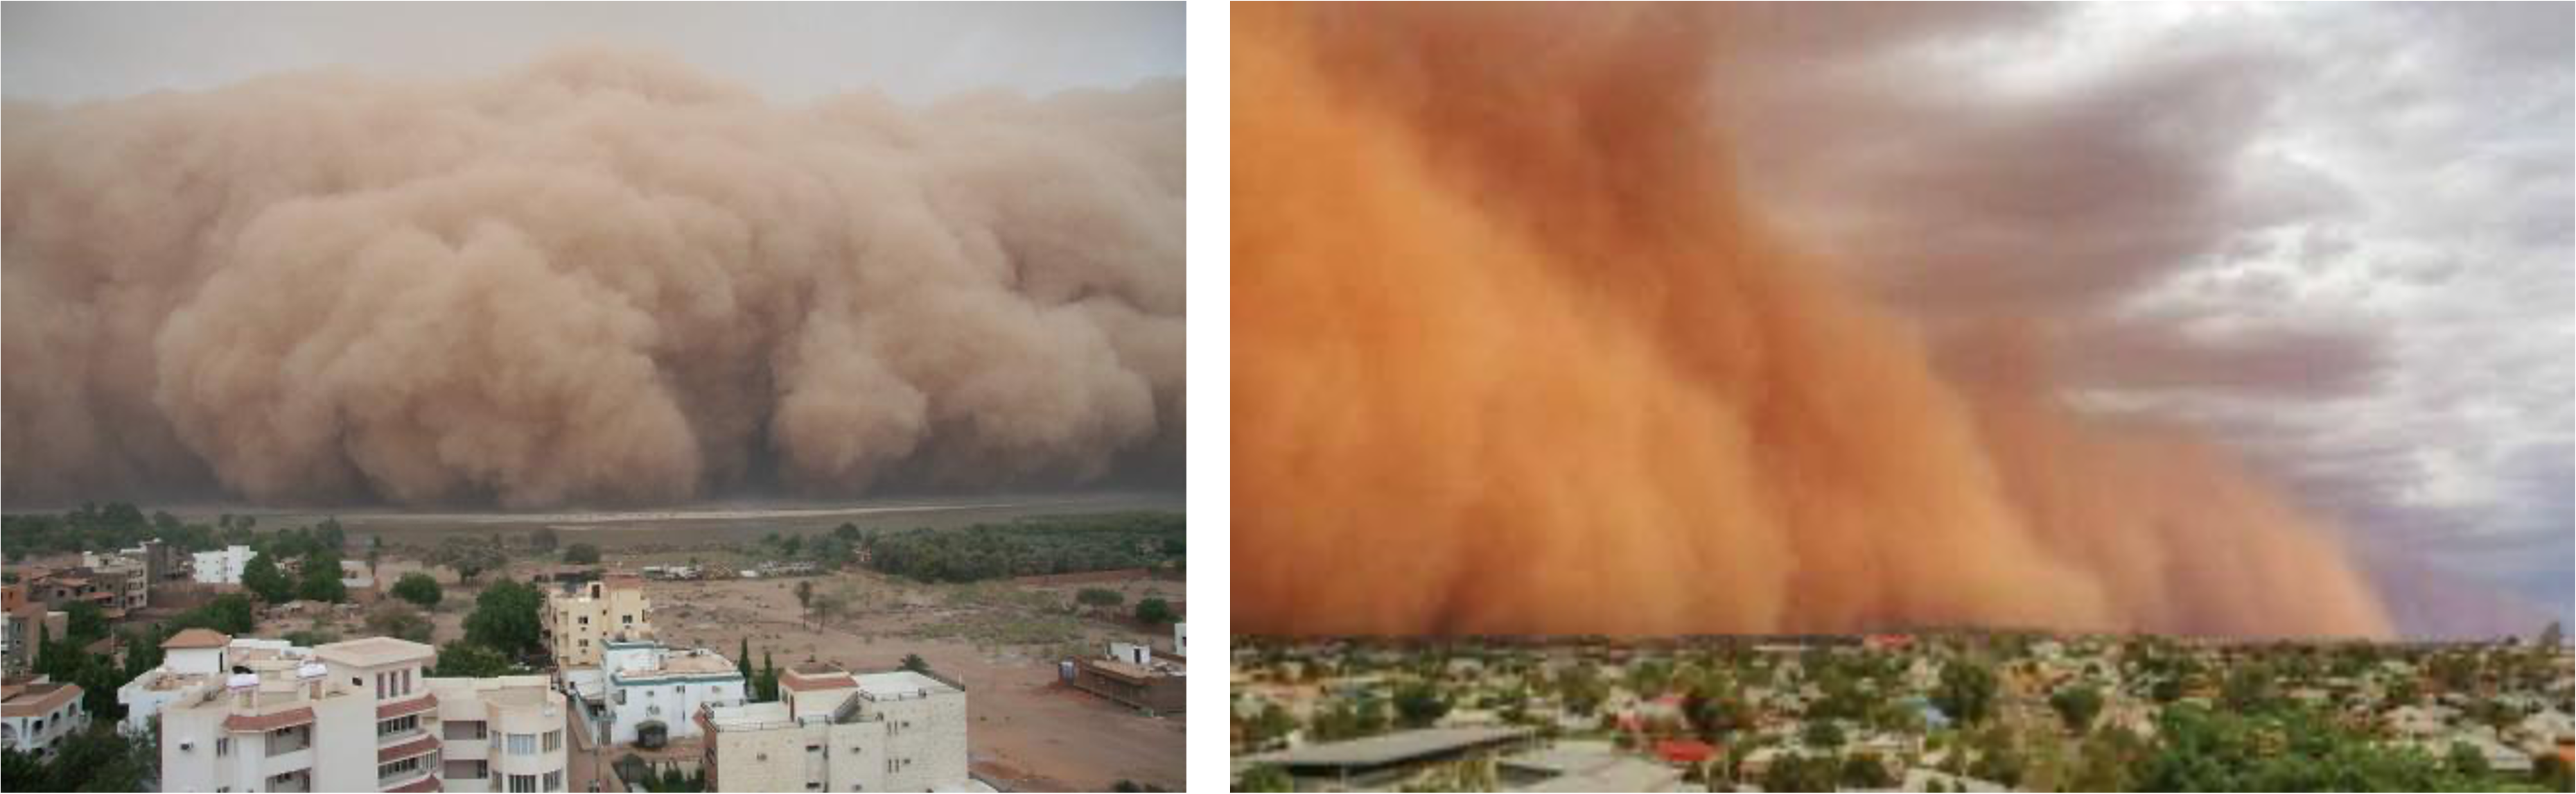 ../_images/dust_storm_combined.png